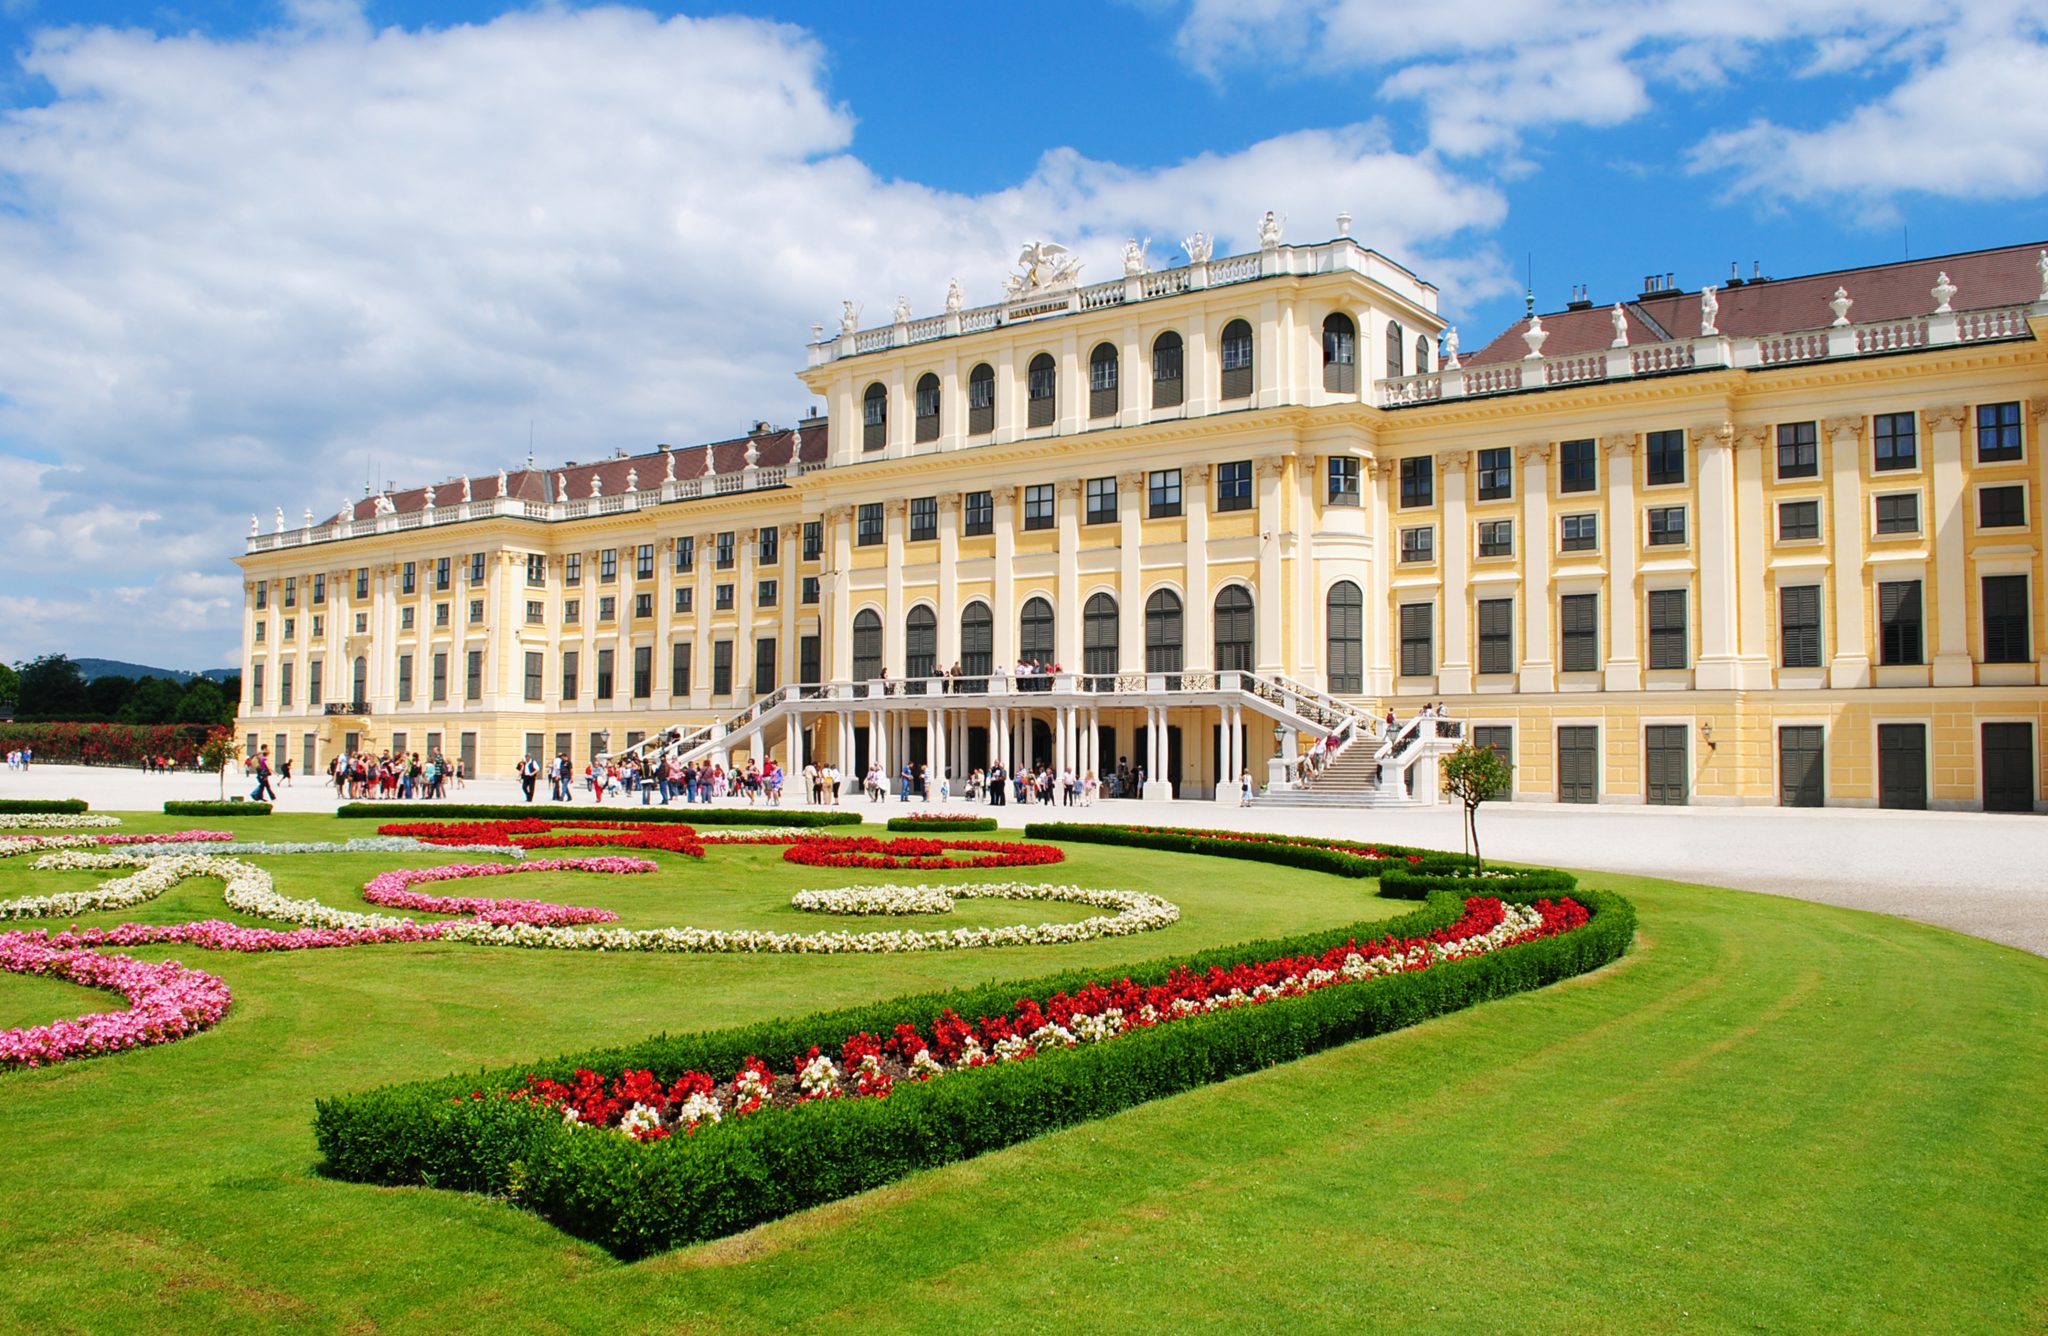 http://www.dreamstime.com/royalty-free-stock-images-schonbrunn-palace-vienna-image18307439